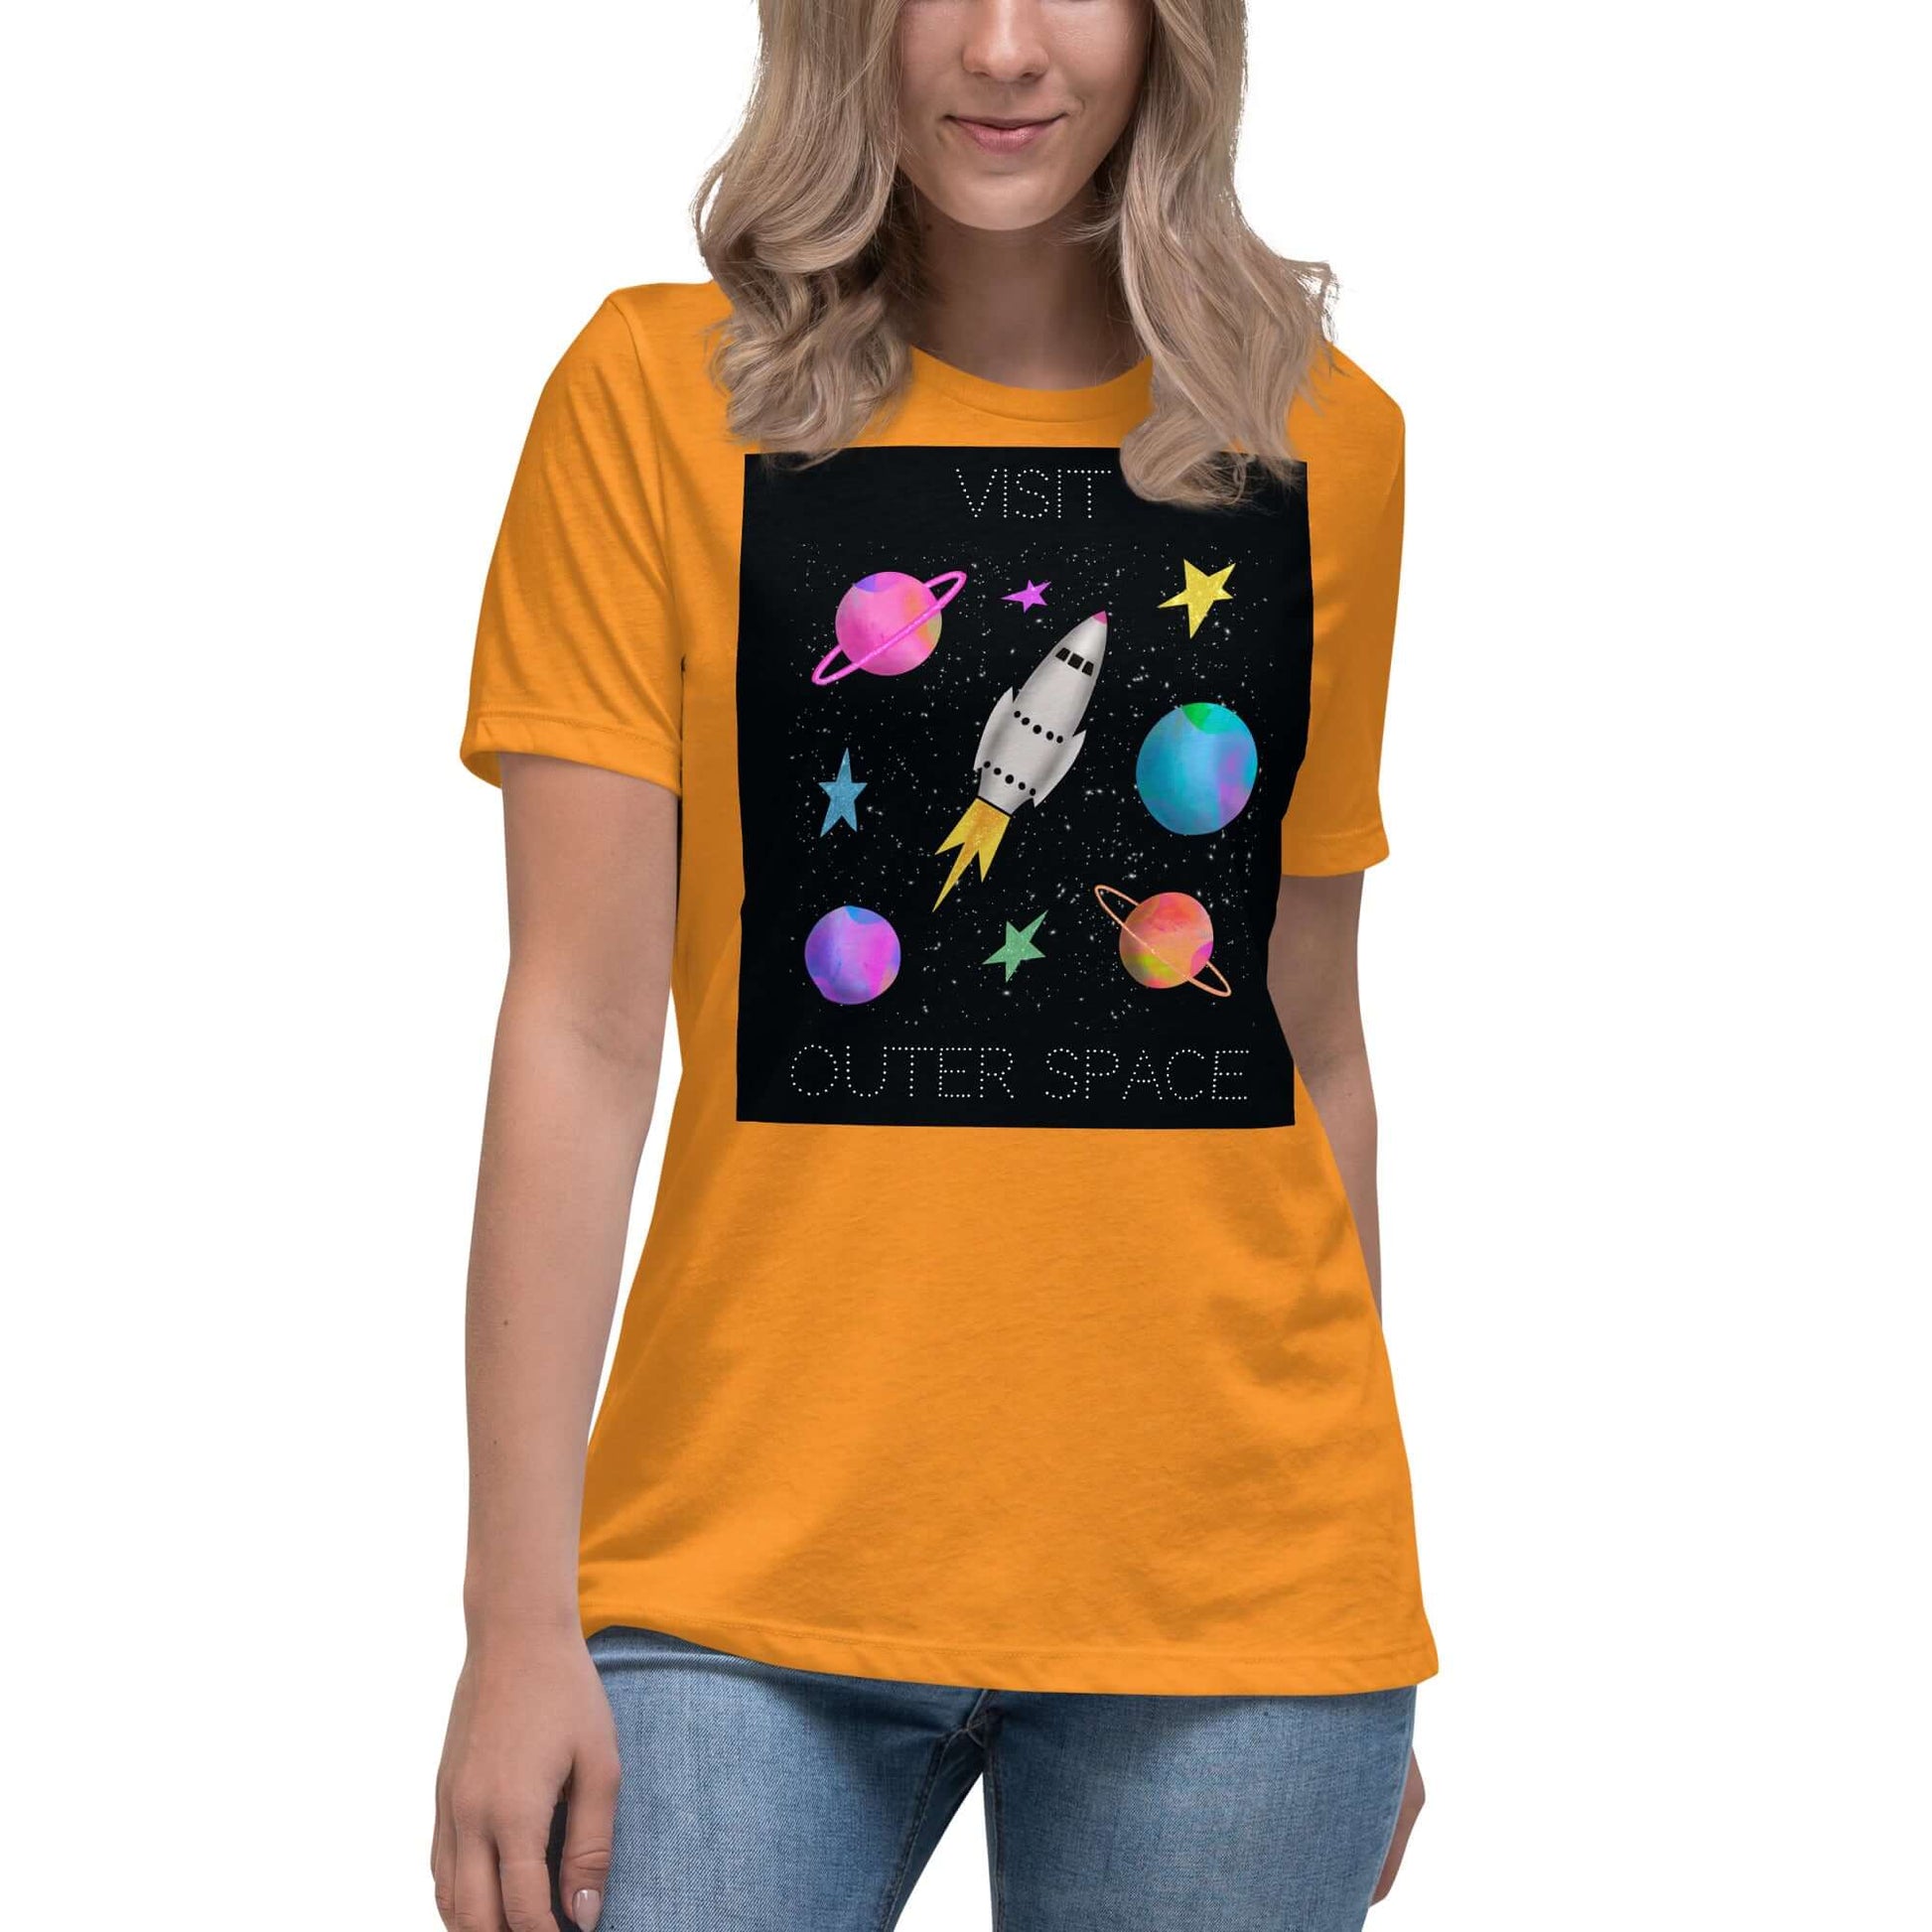 Whimsical Space Rocket with Colorful Planets and Stars on Black Background with Text “Visit Outer Space” Women’s Short Sleeve Tee in Heather Marmalade